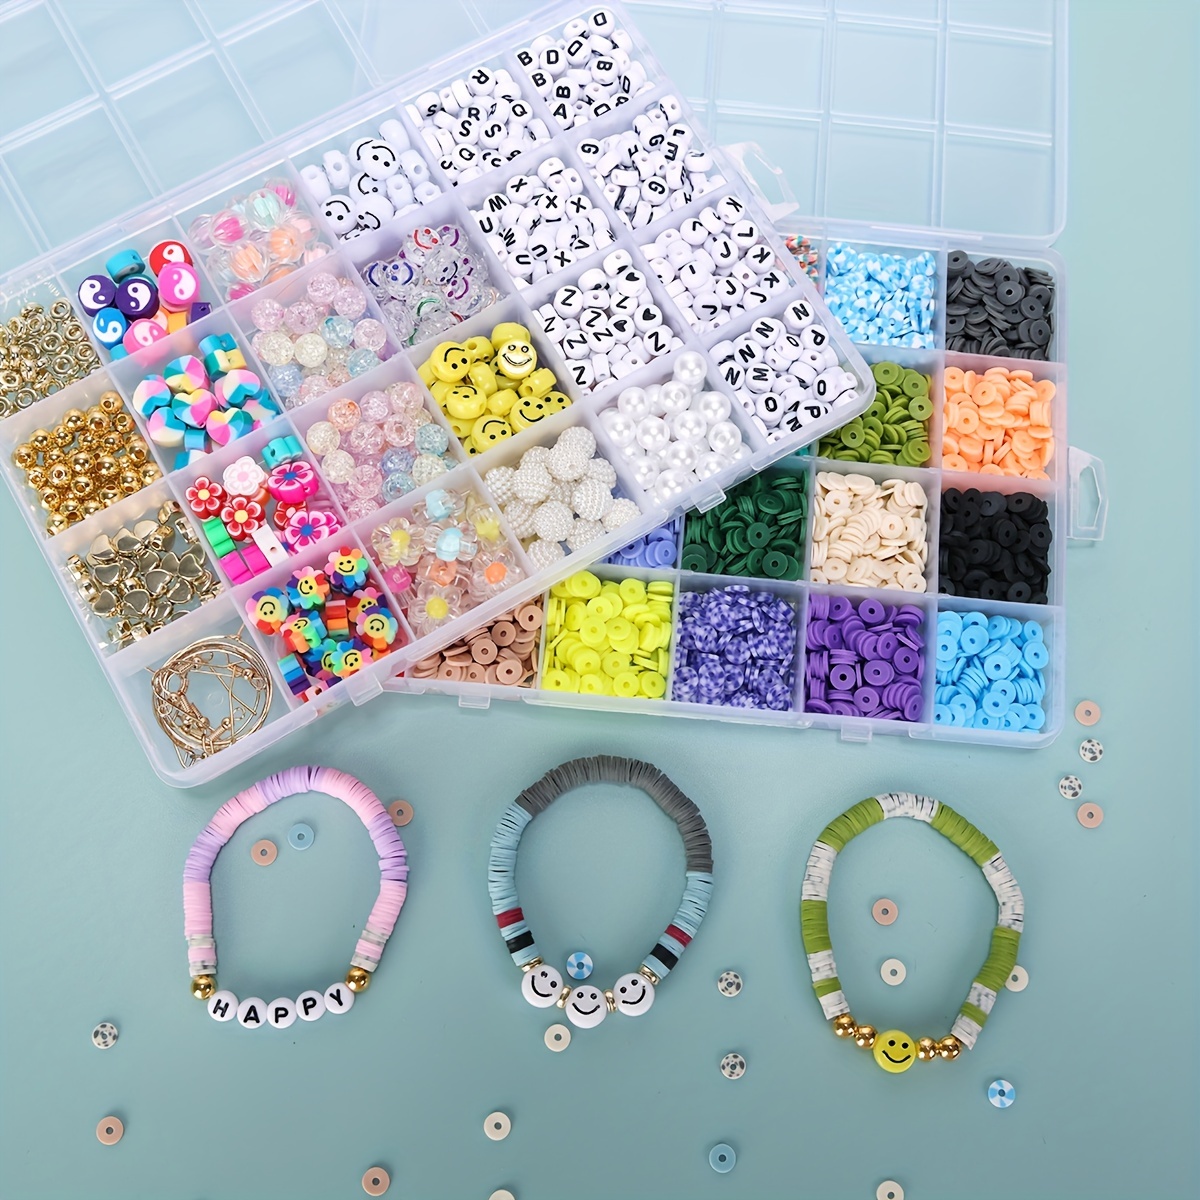 8400Pcs Clay Beads Bracelet Making Kit, Jewelry Making Kit For Girls  Friendship Bracelet Beads Polymer Heishi Beads With Charms Crafts Gifts For Teen  Girls